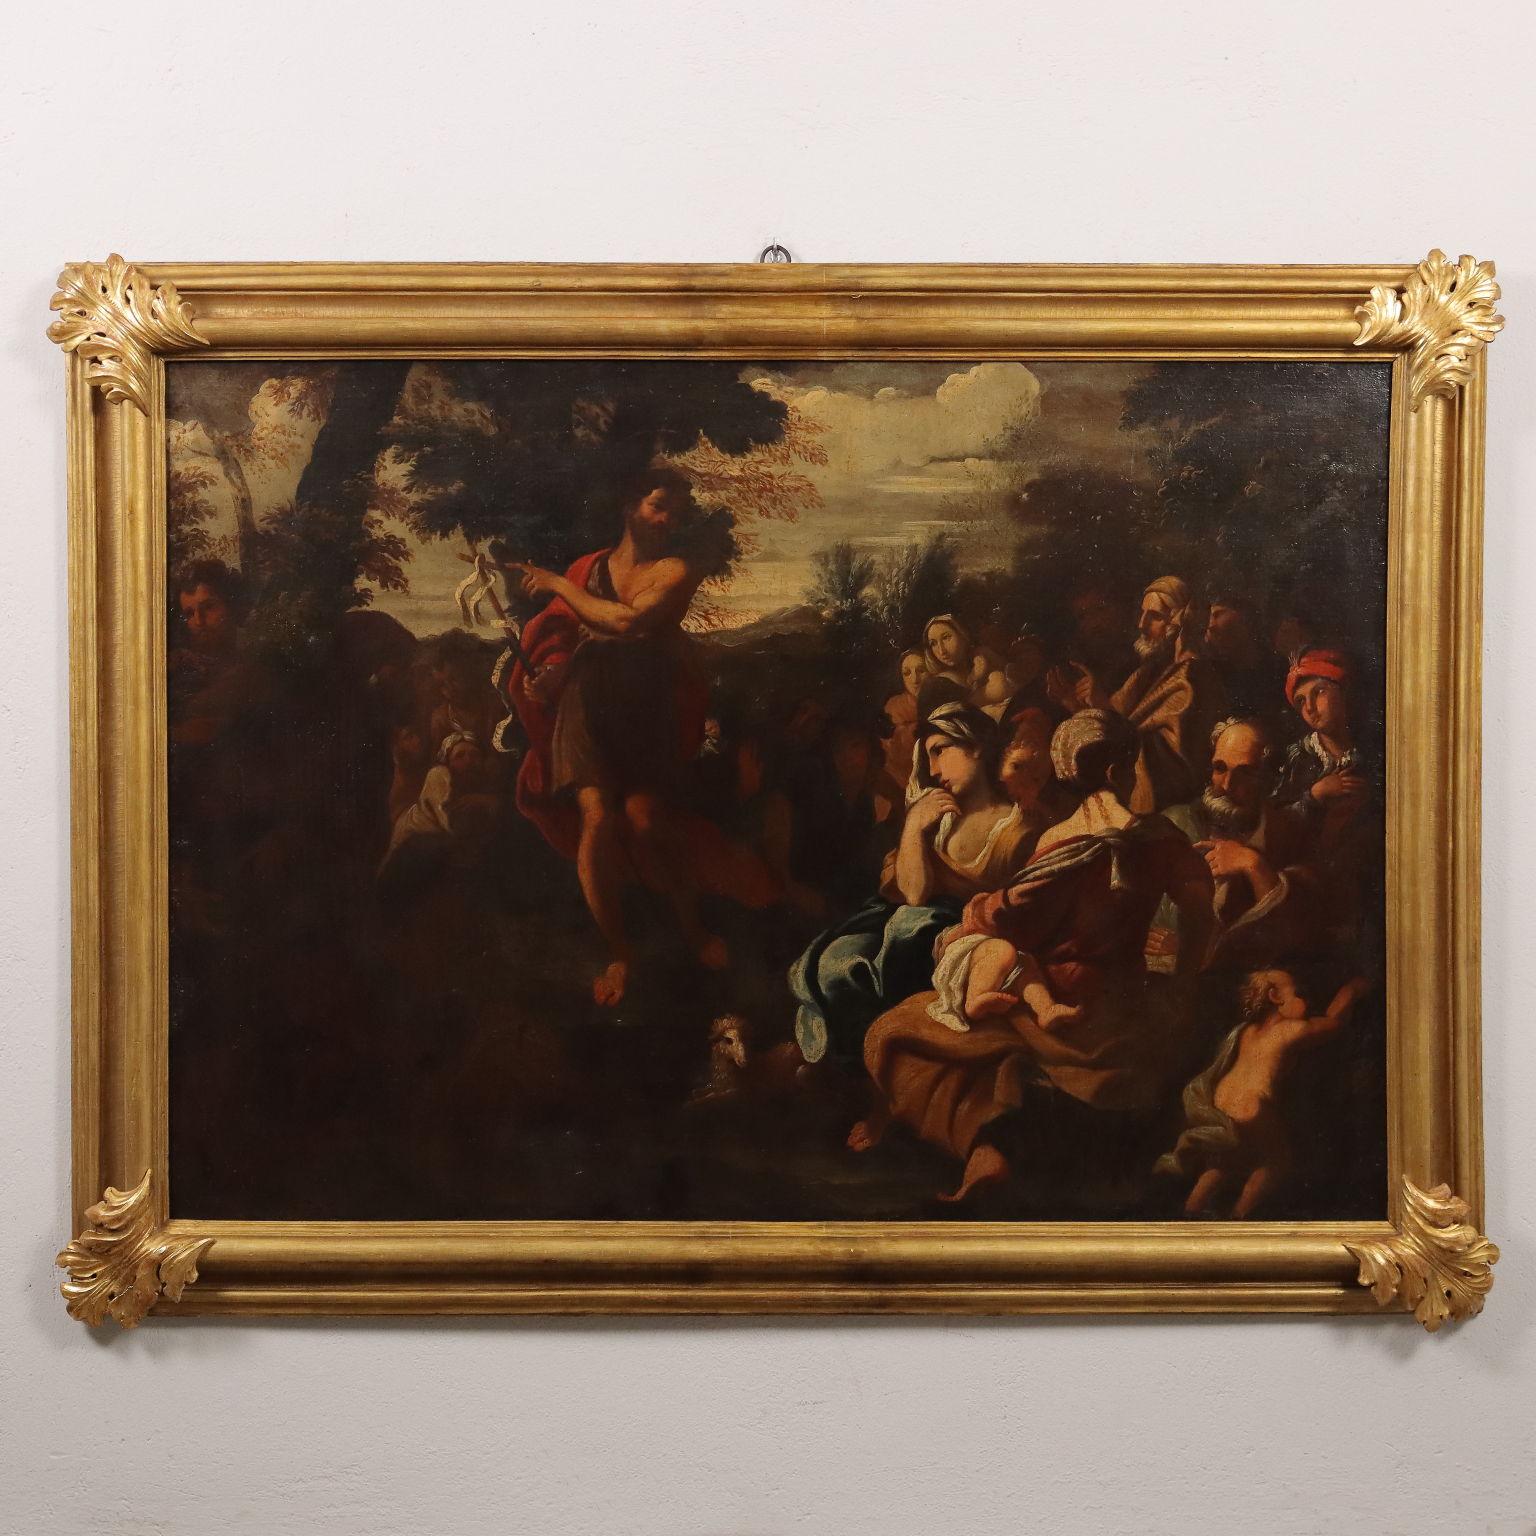 Oil on Canvas. North Italian school of the 17th-18th centuries.
The large scene is filled with figures in ancient Eastern garb, set in a northern, richly vegetated landscape with mountain peaks in the distance.
The left half is occupied mainly by